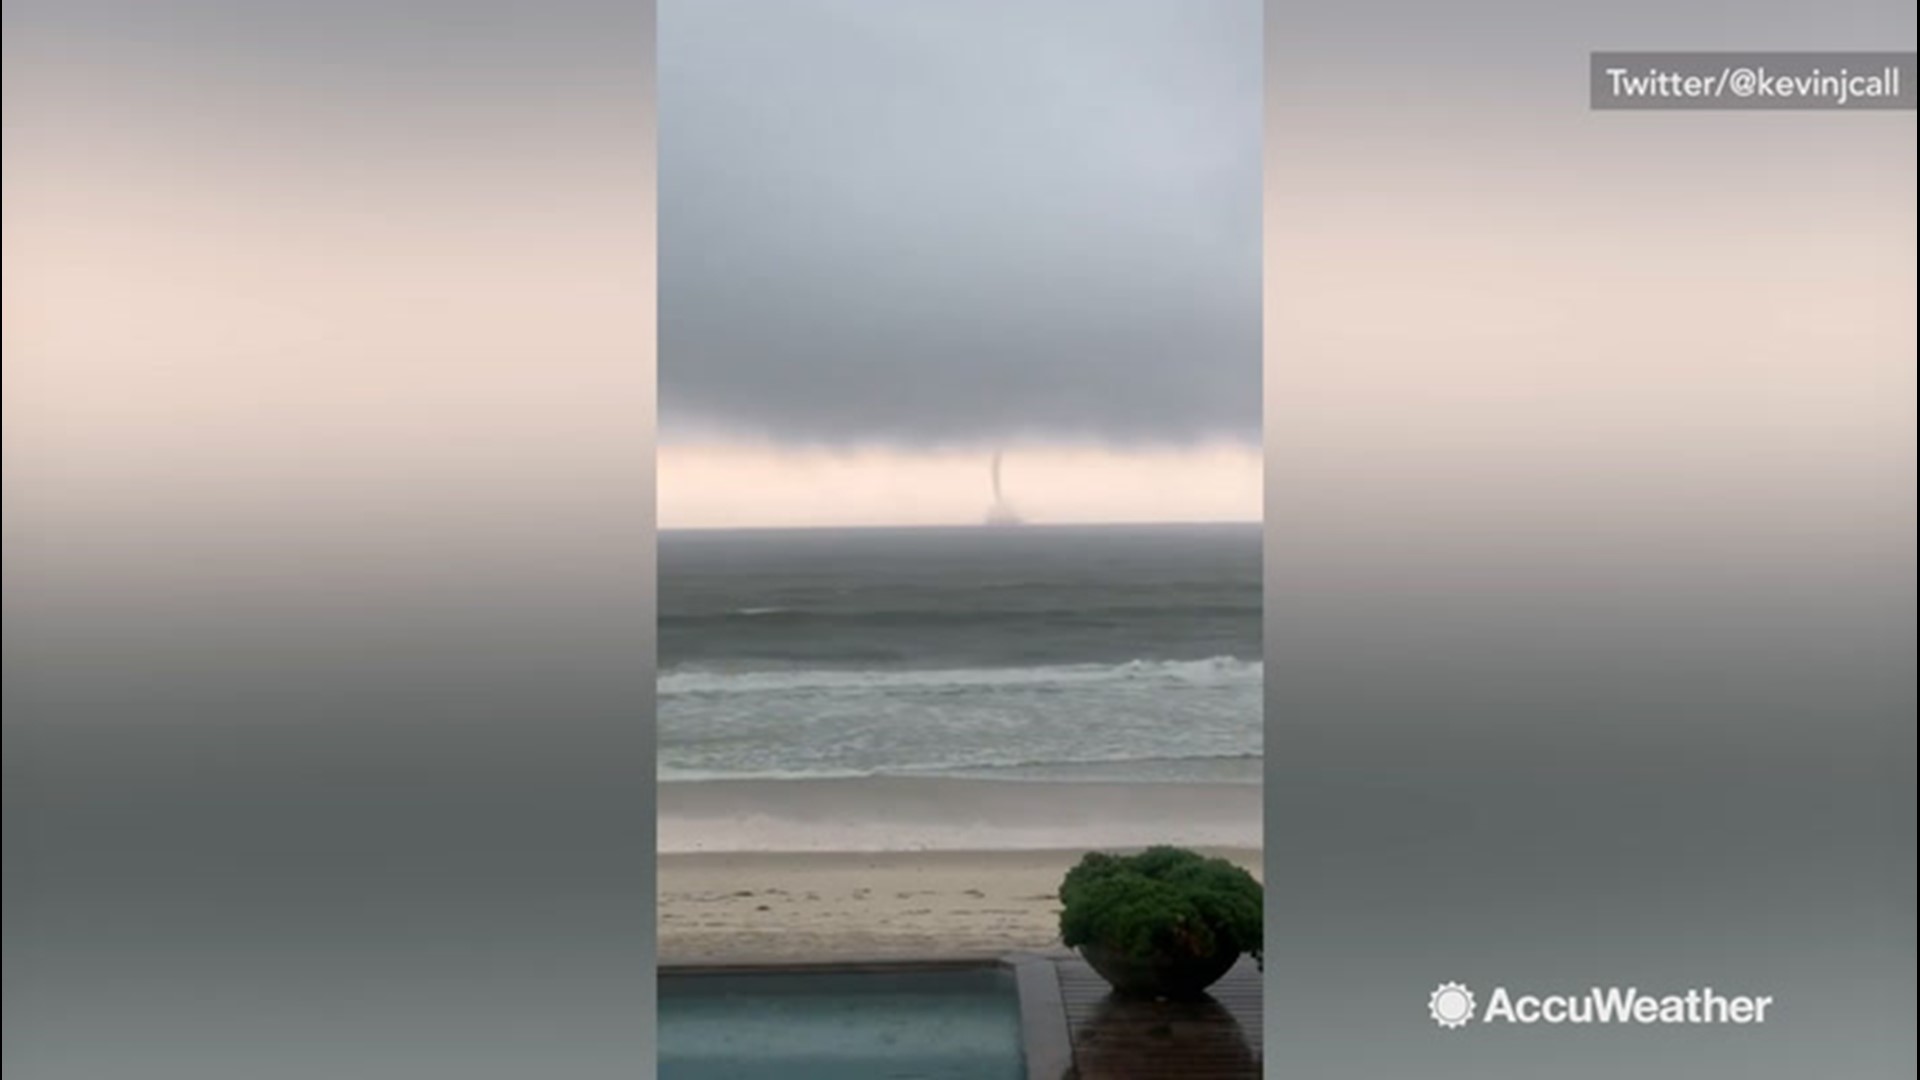 'Dorothy!' Twitter user @kevinjcall calls out as they spot a waterspout in the distance in Brooklyn, New York, on Sept. 2.